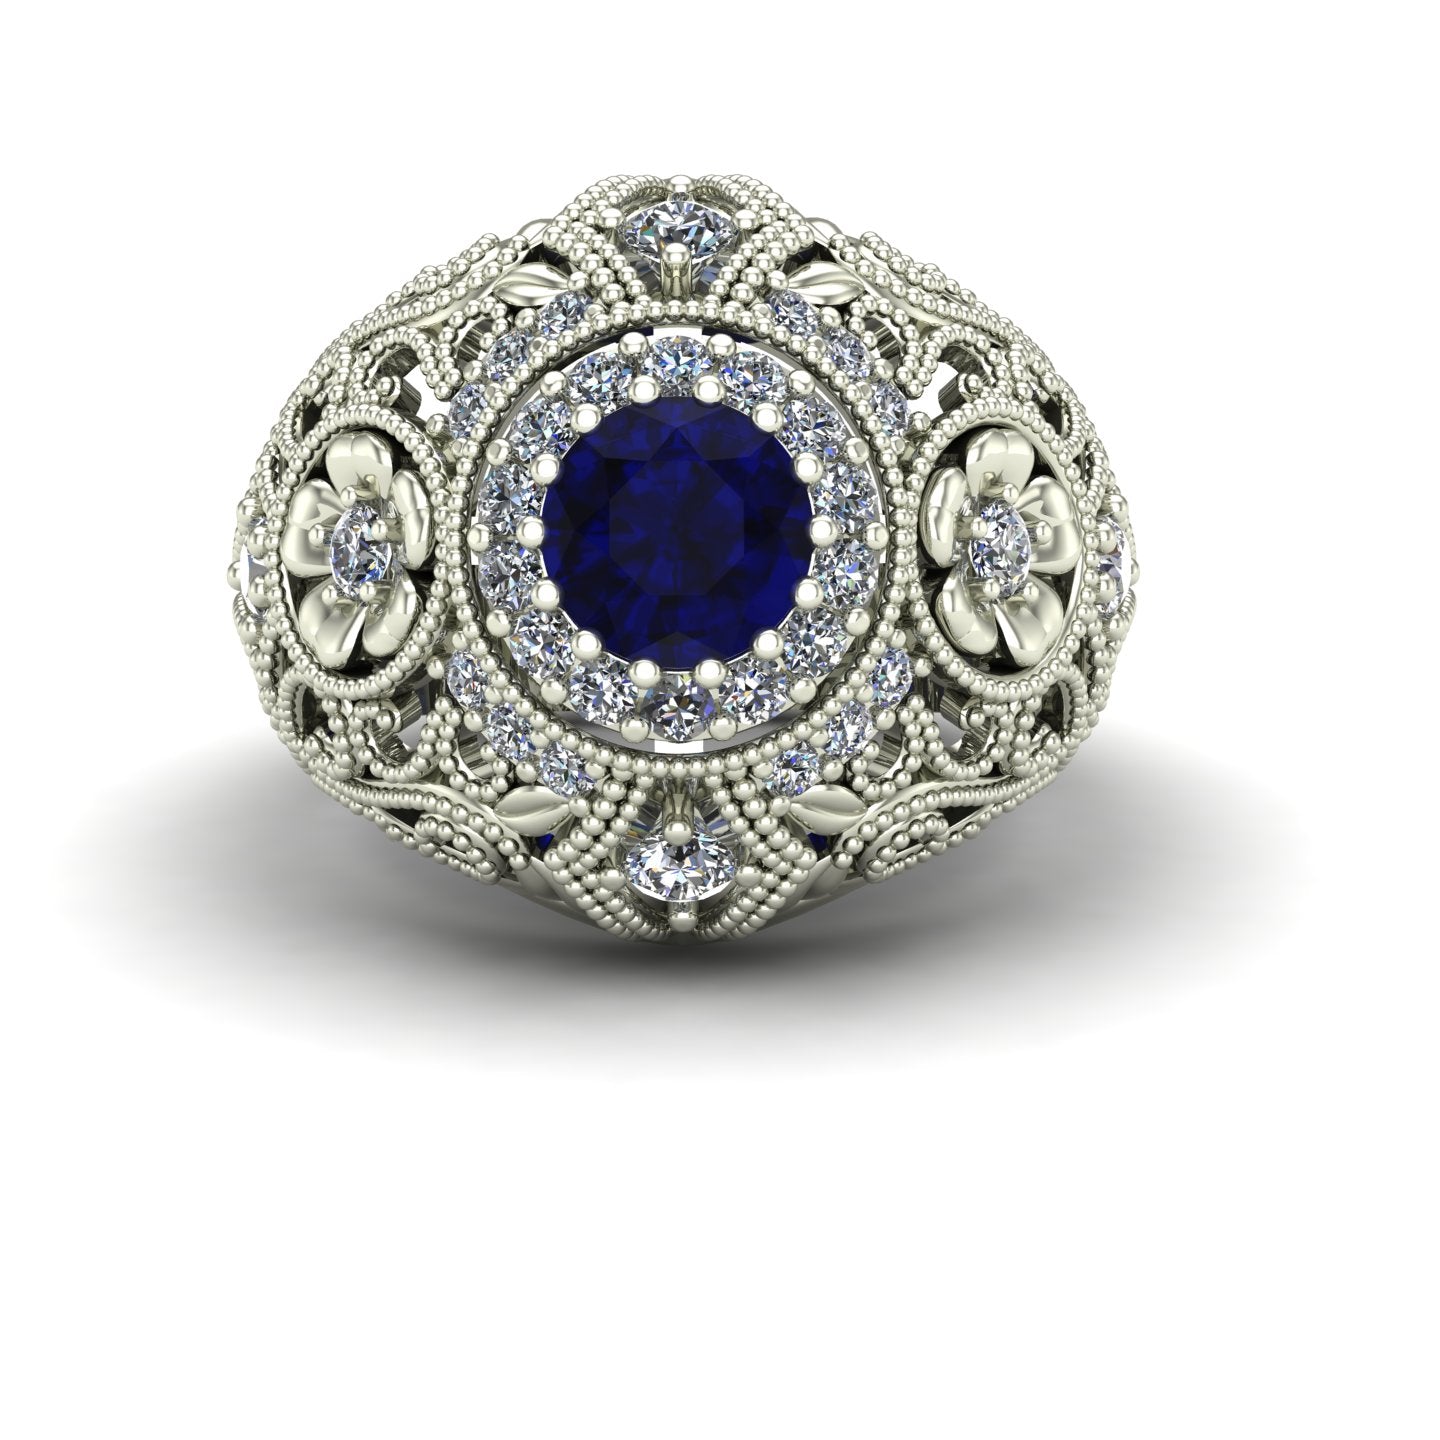 blue sapphire and diamond large dome cocktail ring in 14k white gold - Charles Babb Designs - top view